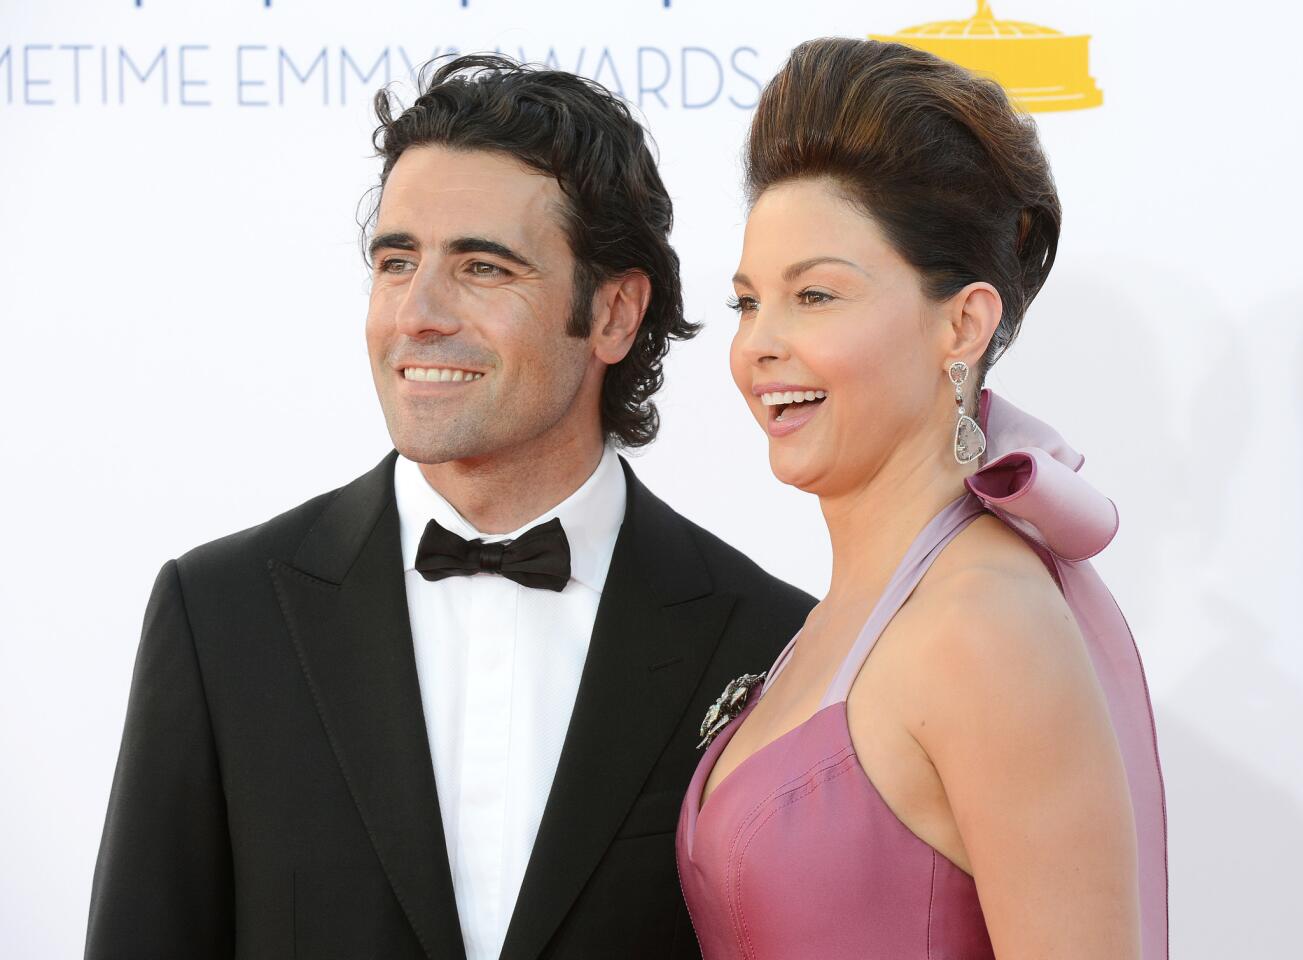 After 11 years of marriage, Ashley Judd and Dario Franchitti announced their decision to end their marriage in January.